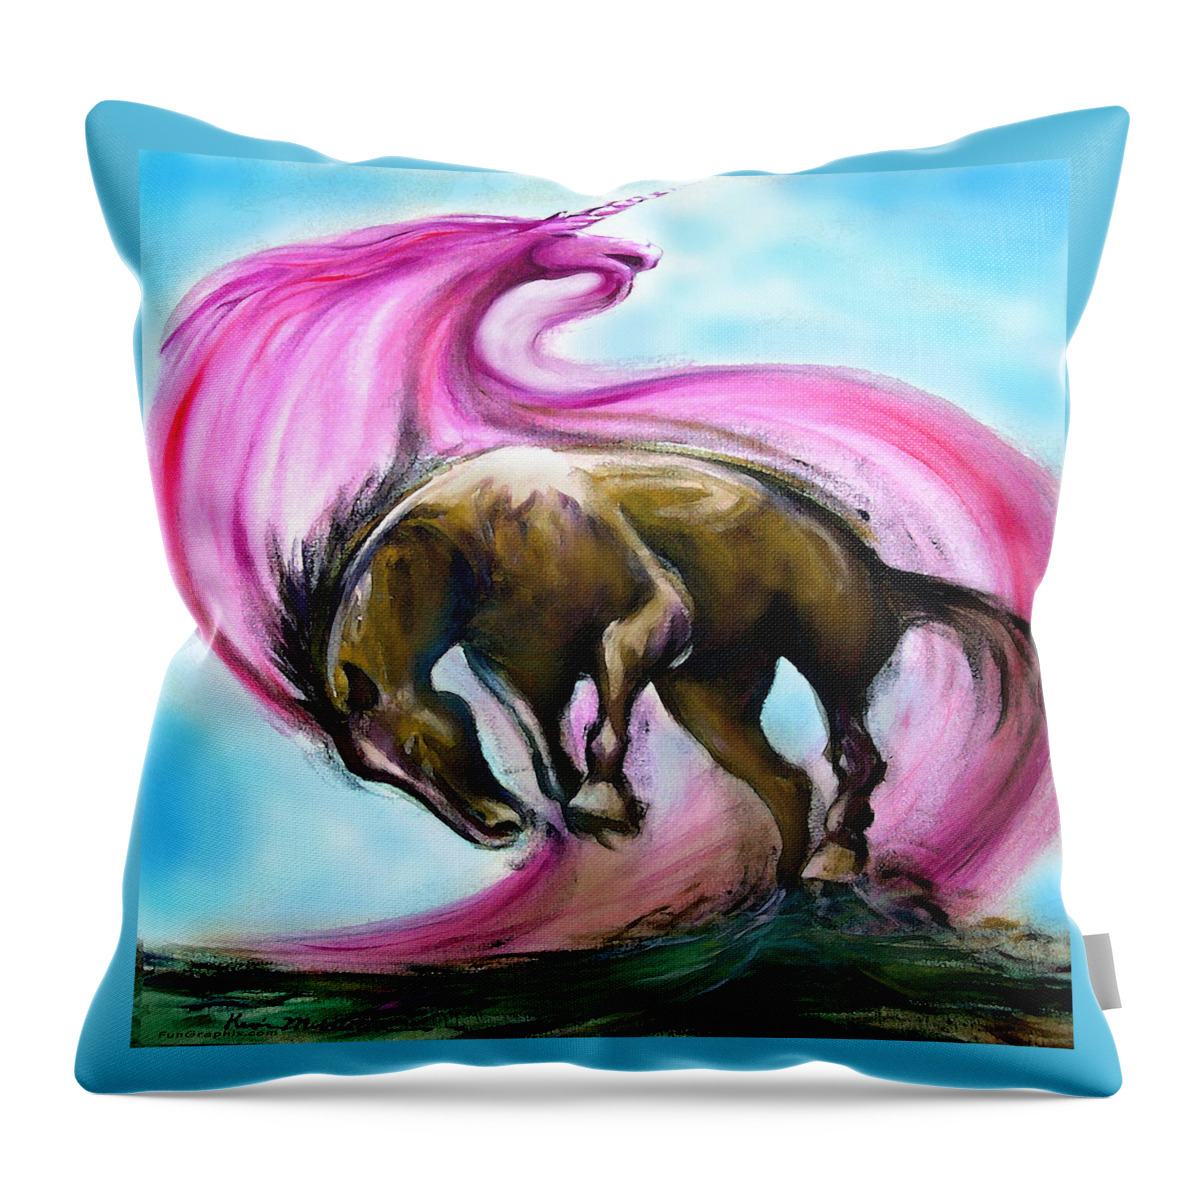 Unicorn Throw Pillow featuring the painting What If... by Kevin Middleton